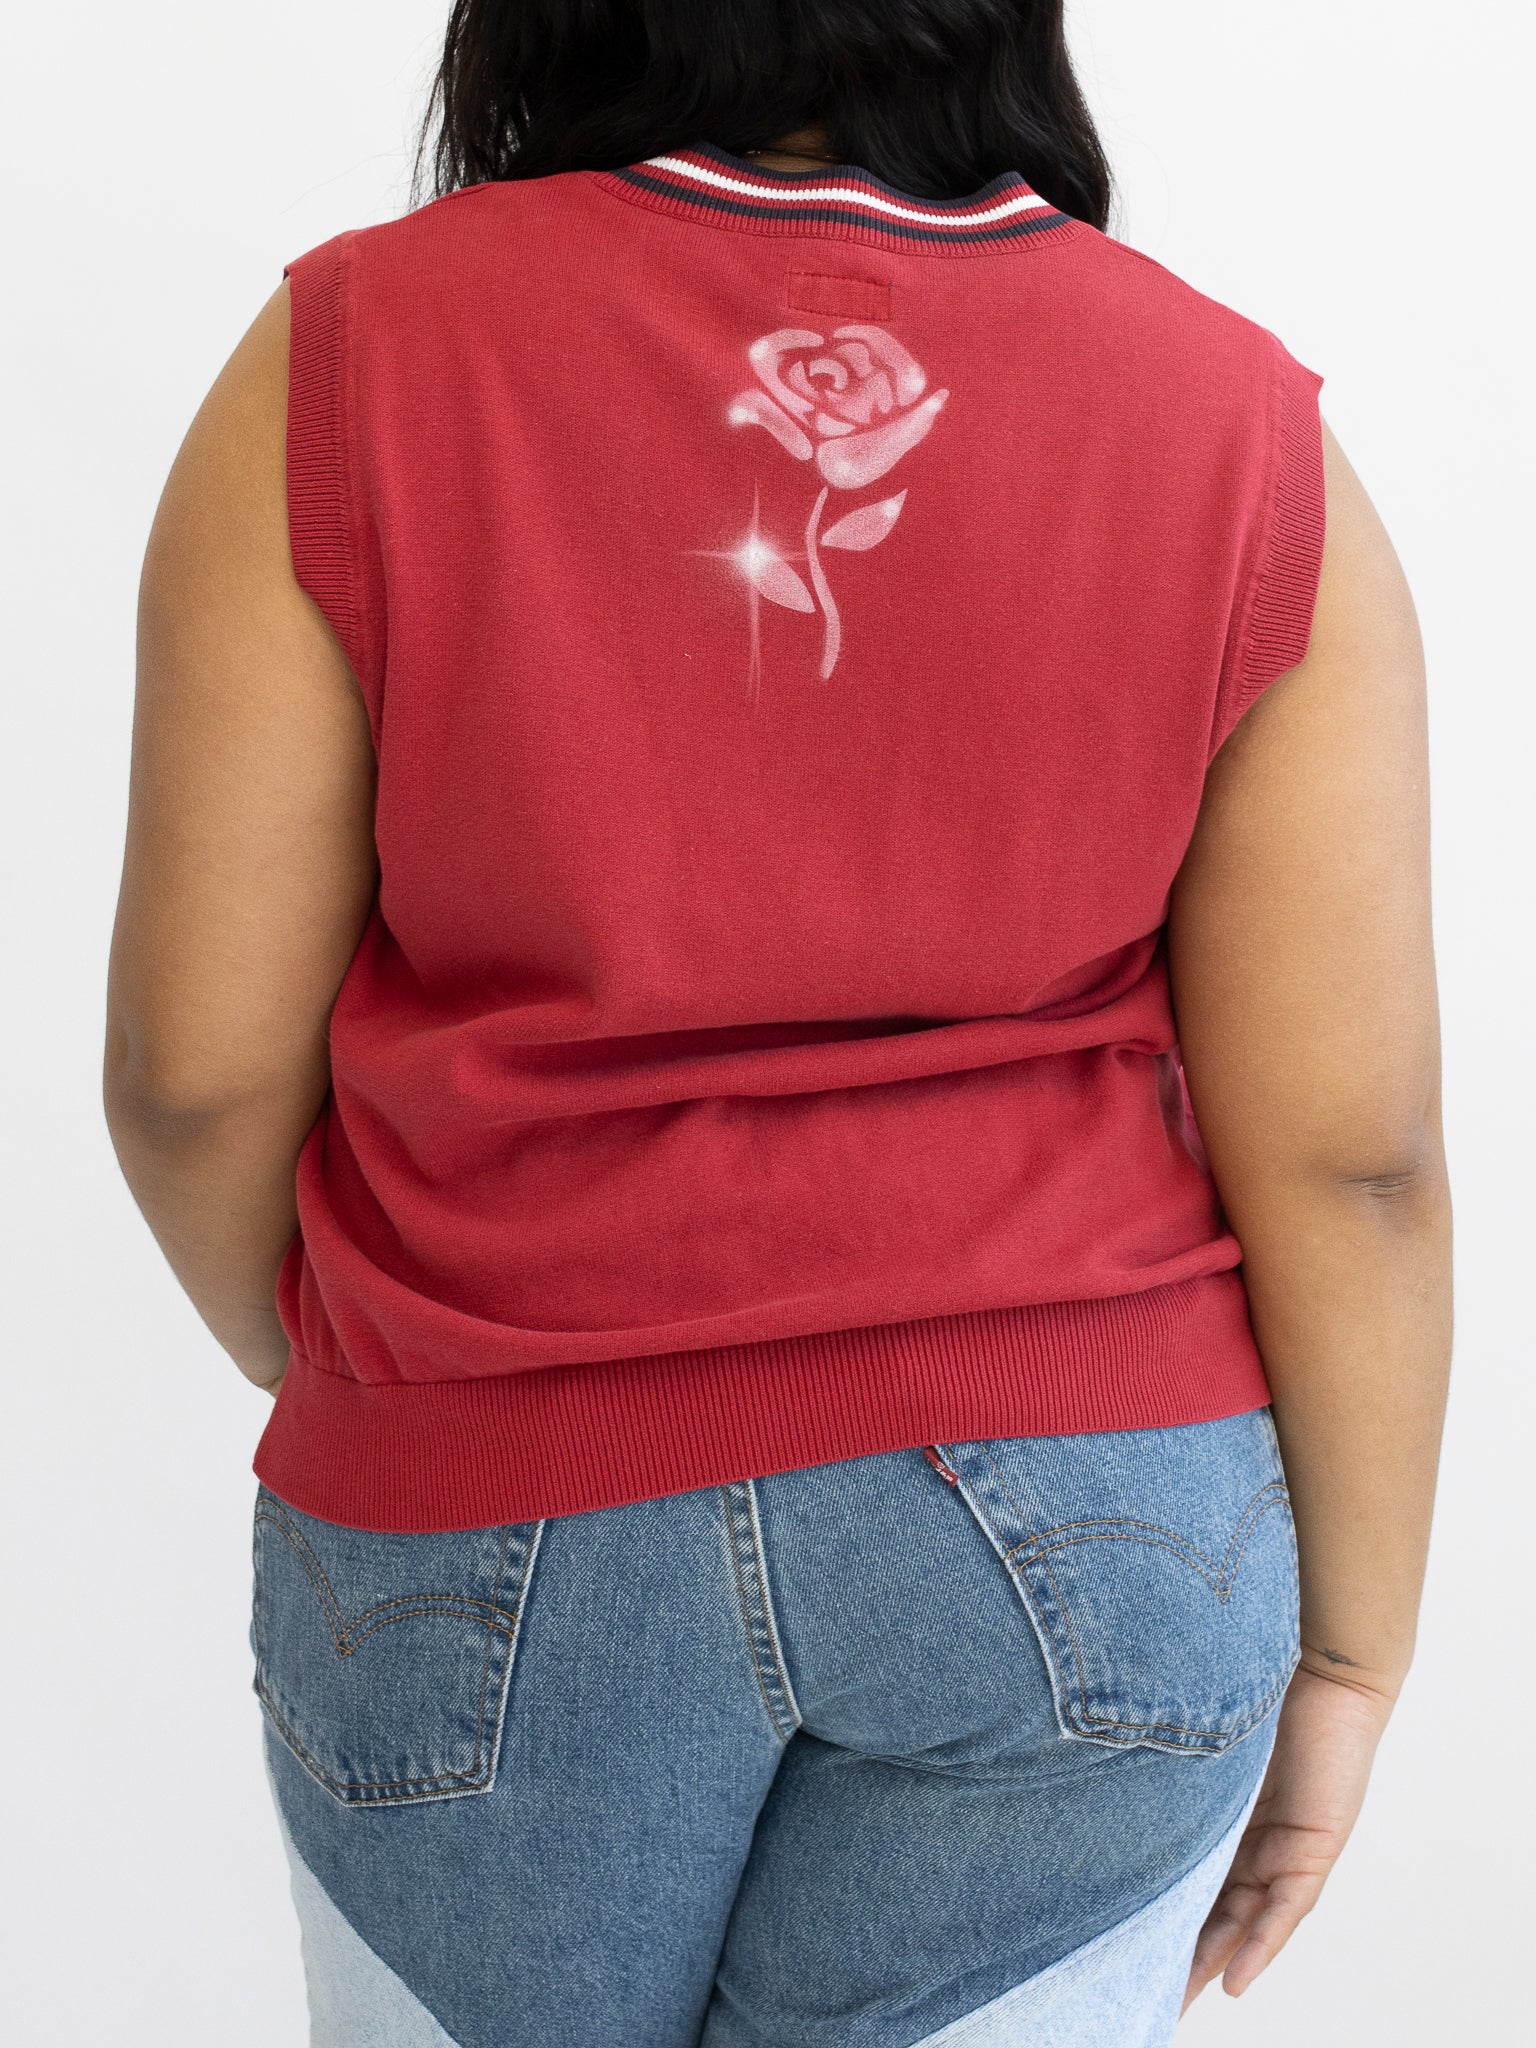 Femlord x BRZ - Red NY Sweater Vest (XL/1X)